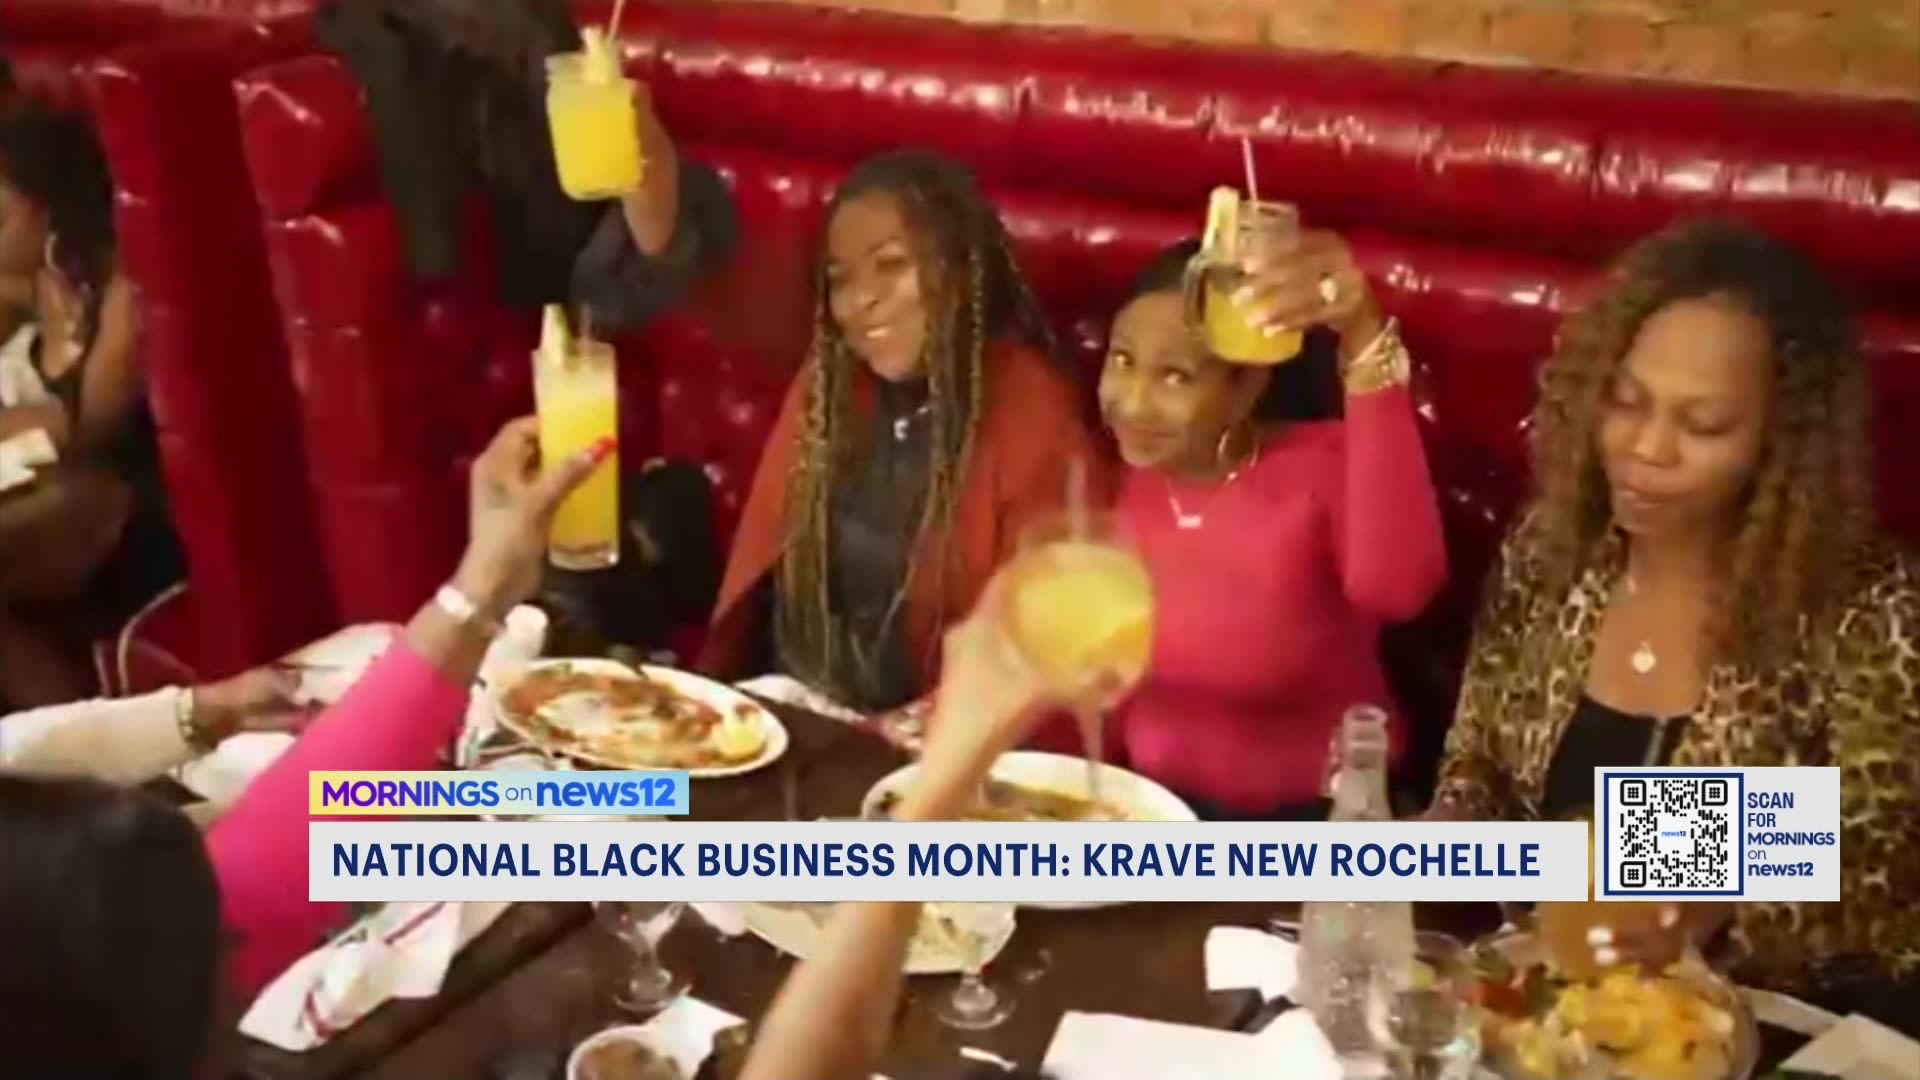 krave-restaurant-serves-up-mouth-watering-caribbean-infused-meals-in-new-rochelle